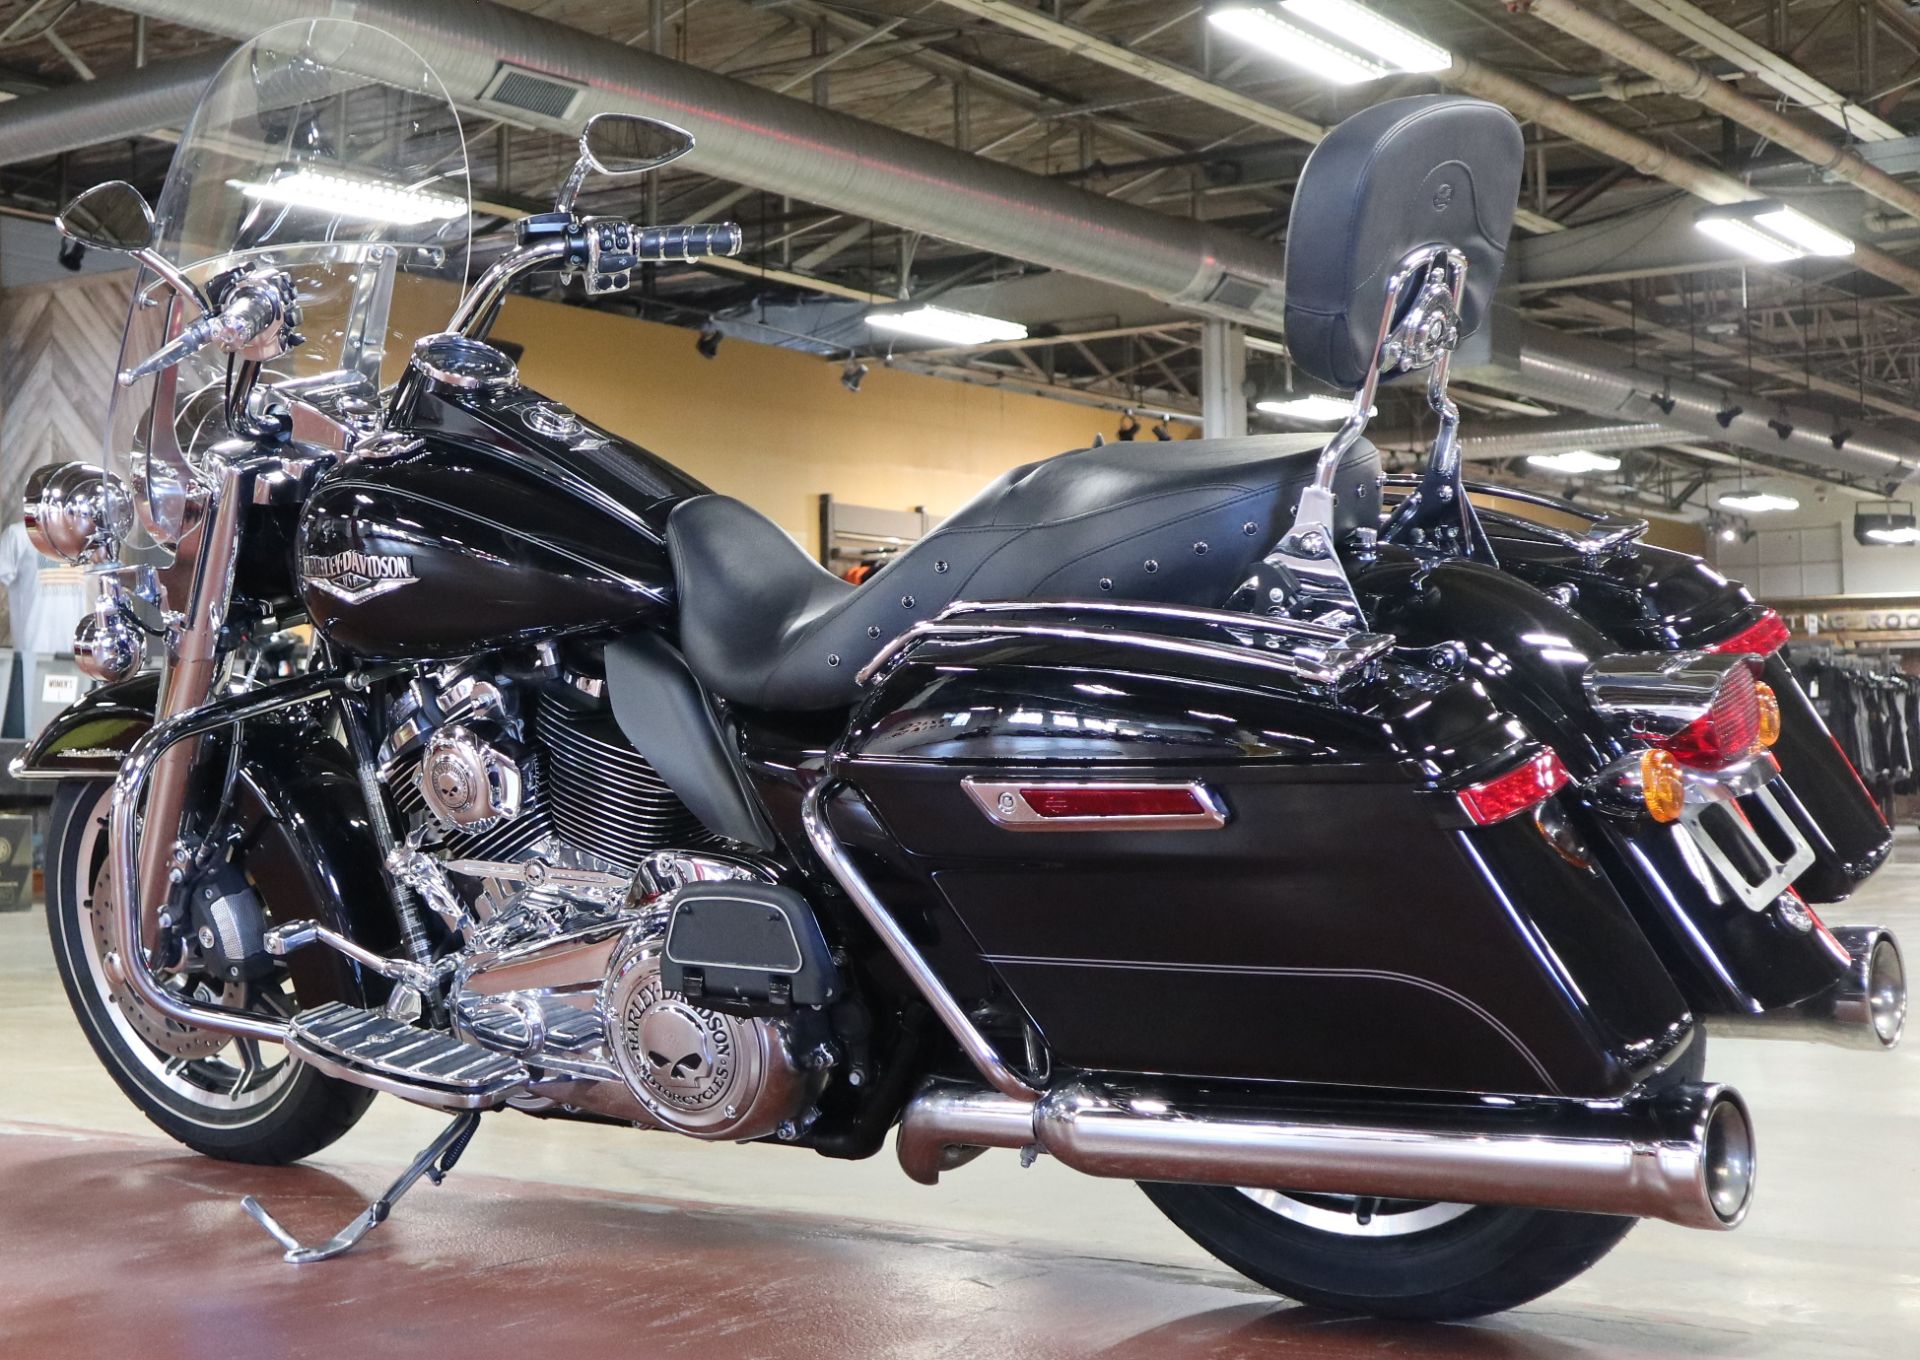 2017 Harley-Davidson Road King® in New London, Connecticut - Photo 6